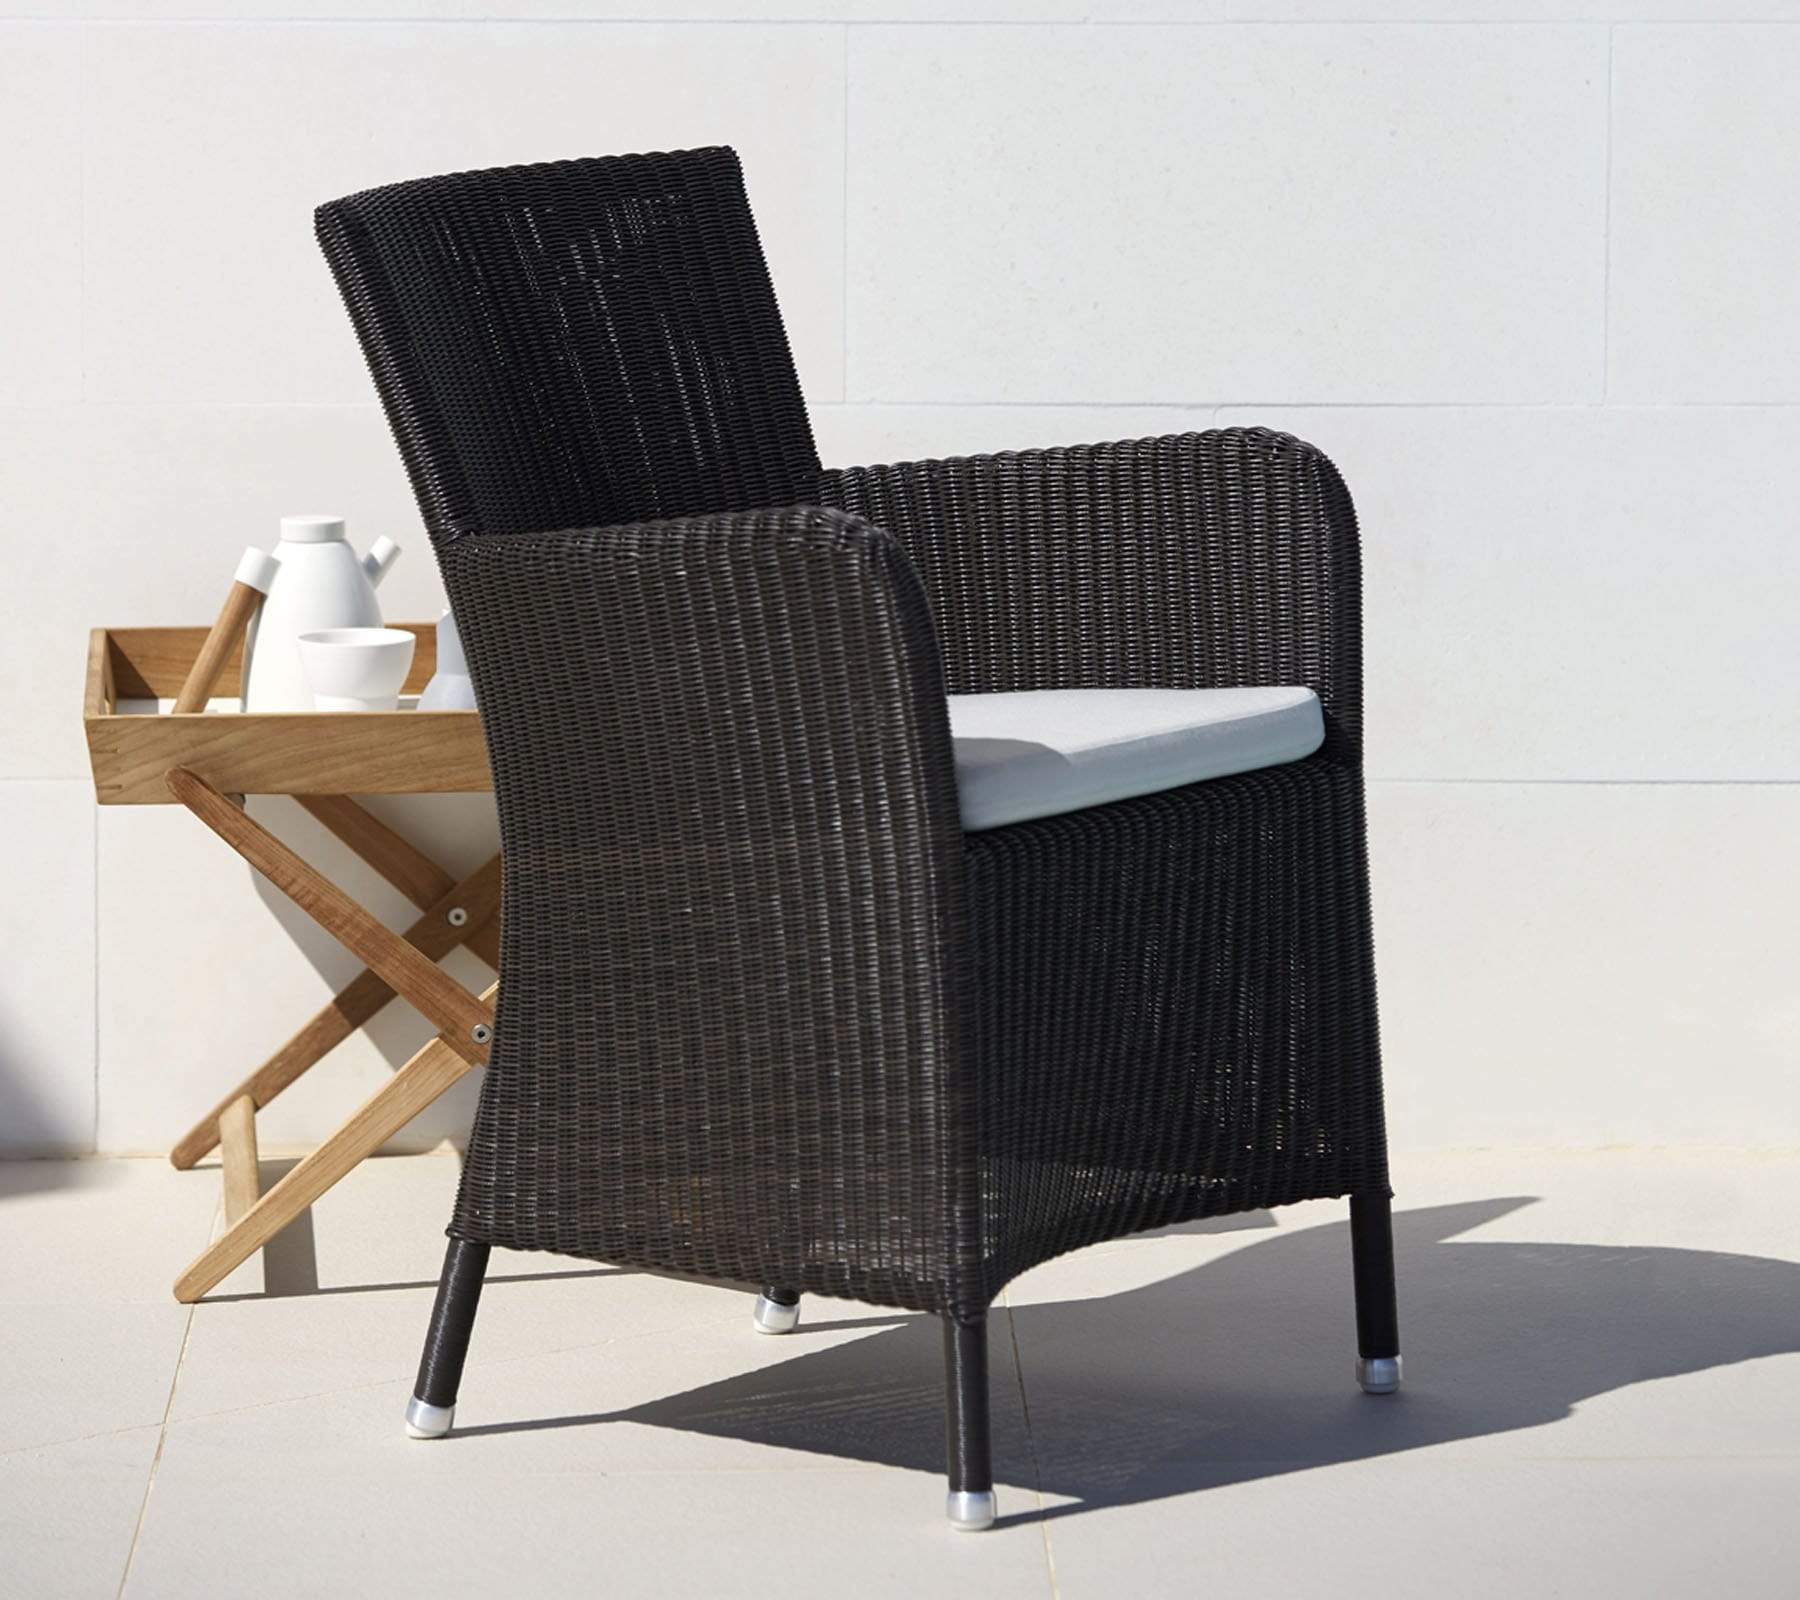 Boxhill's Hampsted Outdoor Dining Armchair Black Weave with White Cushion lifestyle image with teak side table